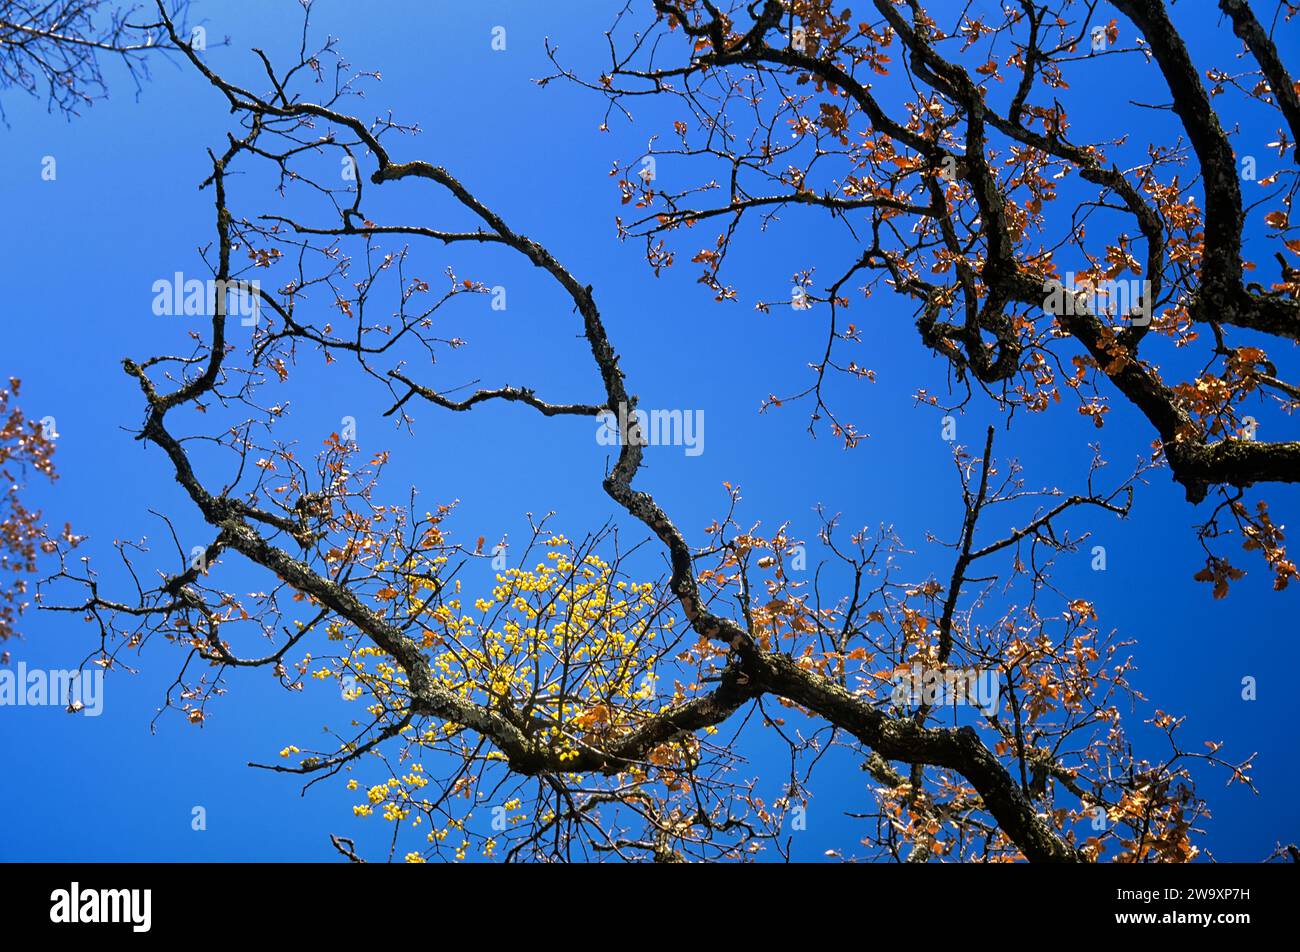 Oak trees (Quercus pubescens) with mistletoe (Loranthus europaeus), winter look with berries. Chianti, Tuscany, Italy Stock Photo